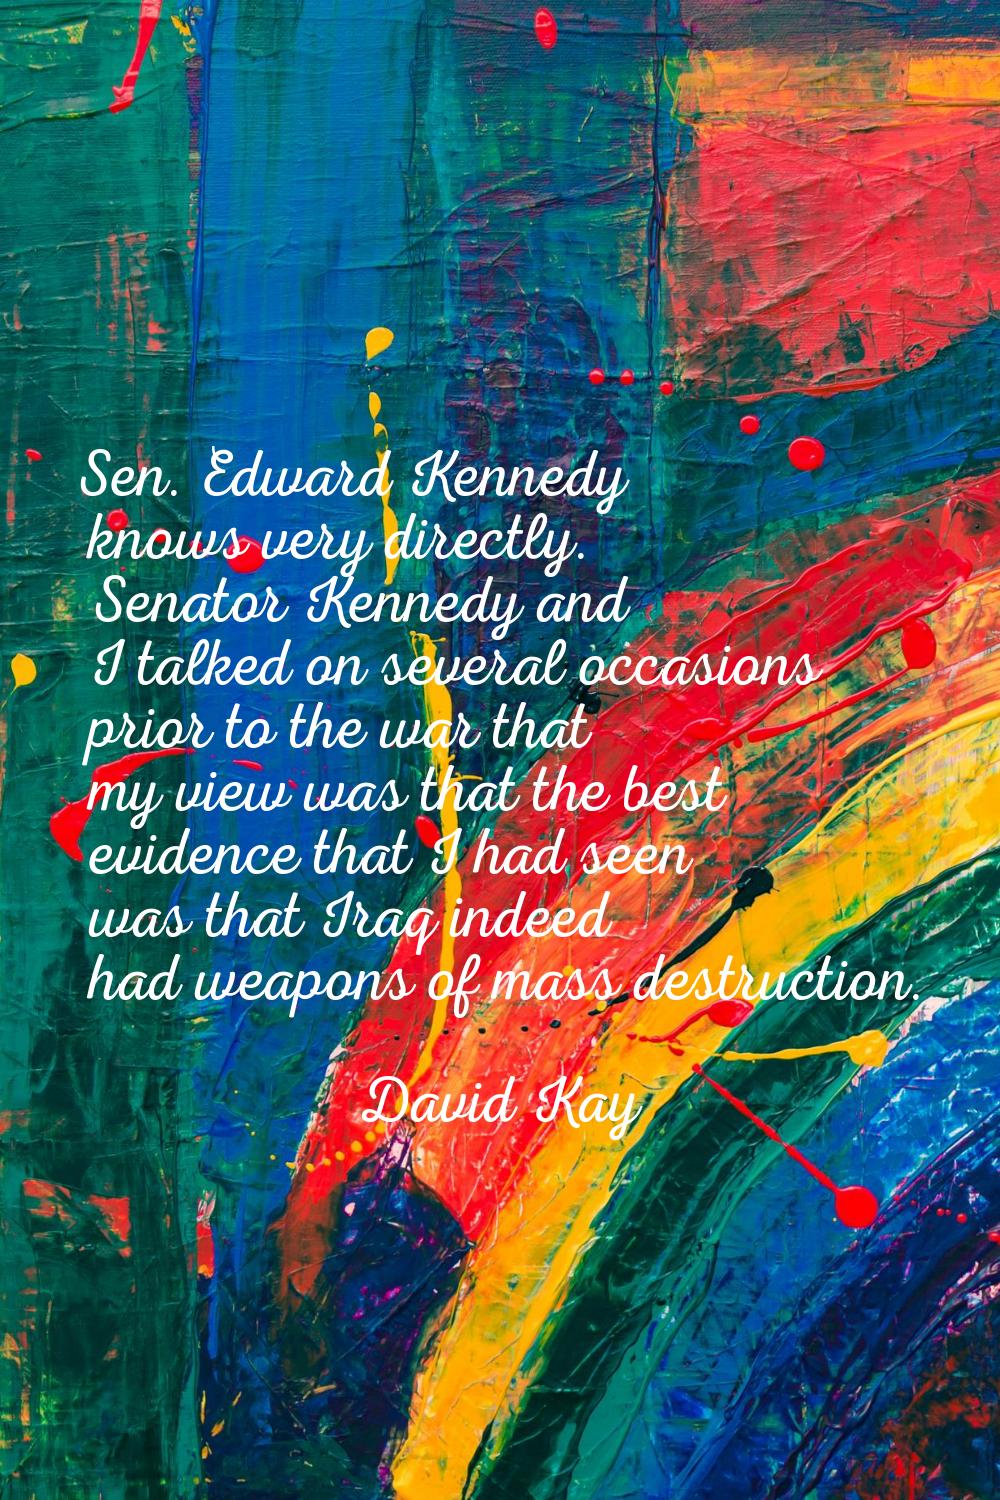 Sen. Edward Kennedy knows very directly. Senator Kennedy and I talked on several occasions prior to